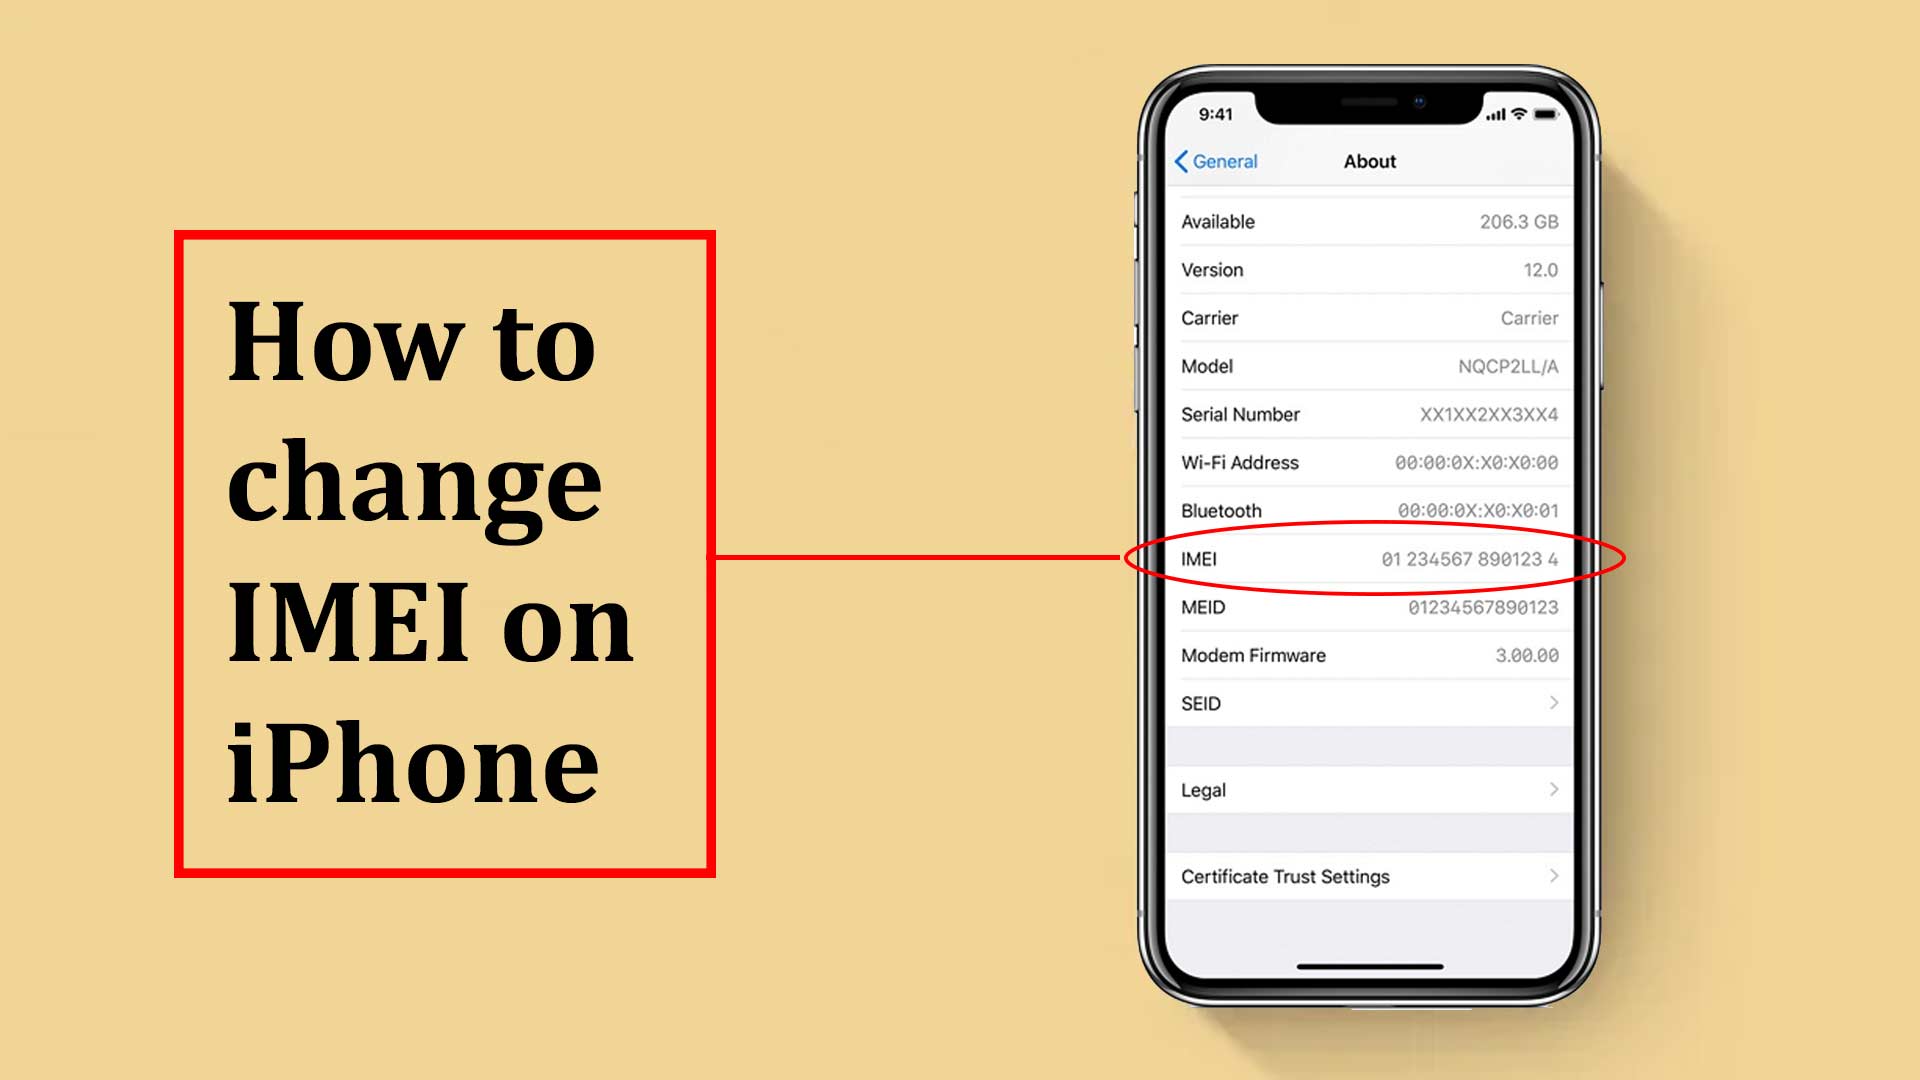 How to change IMEI on iPhone